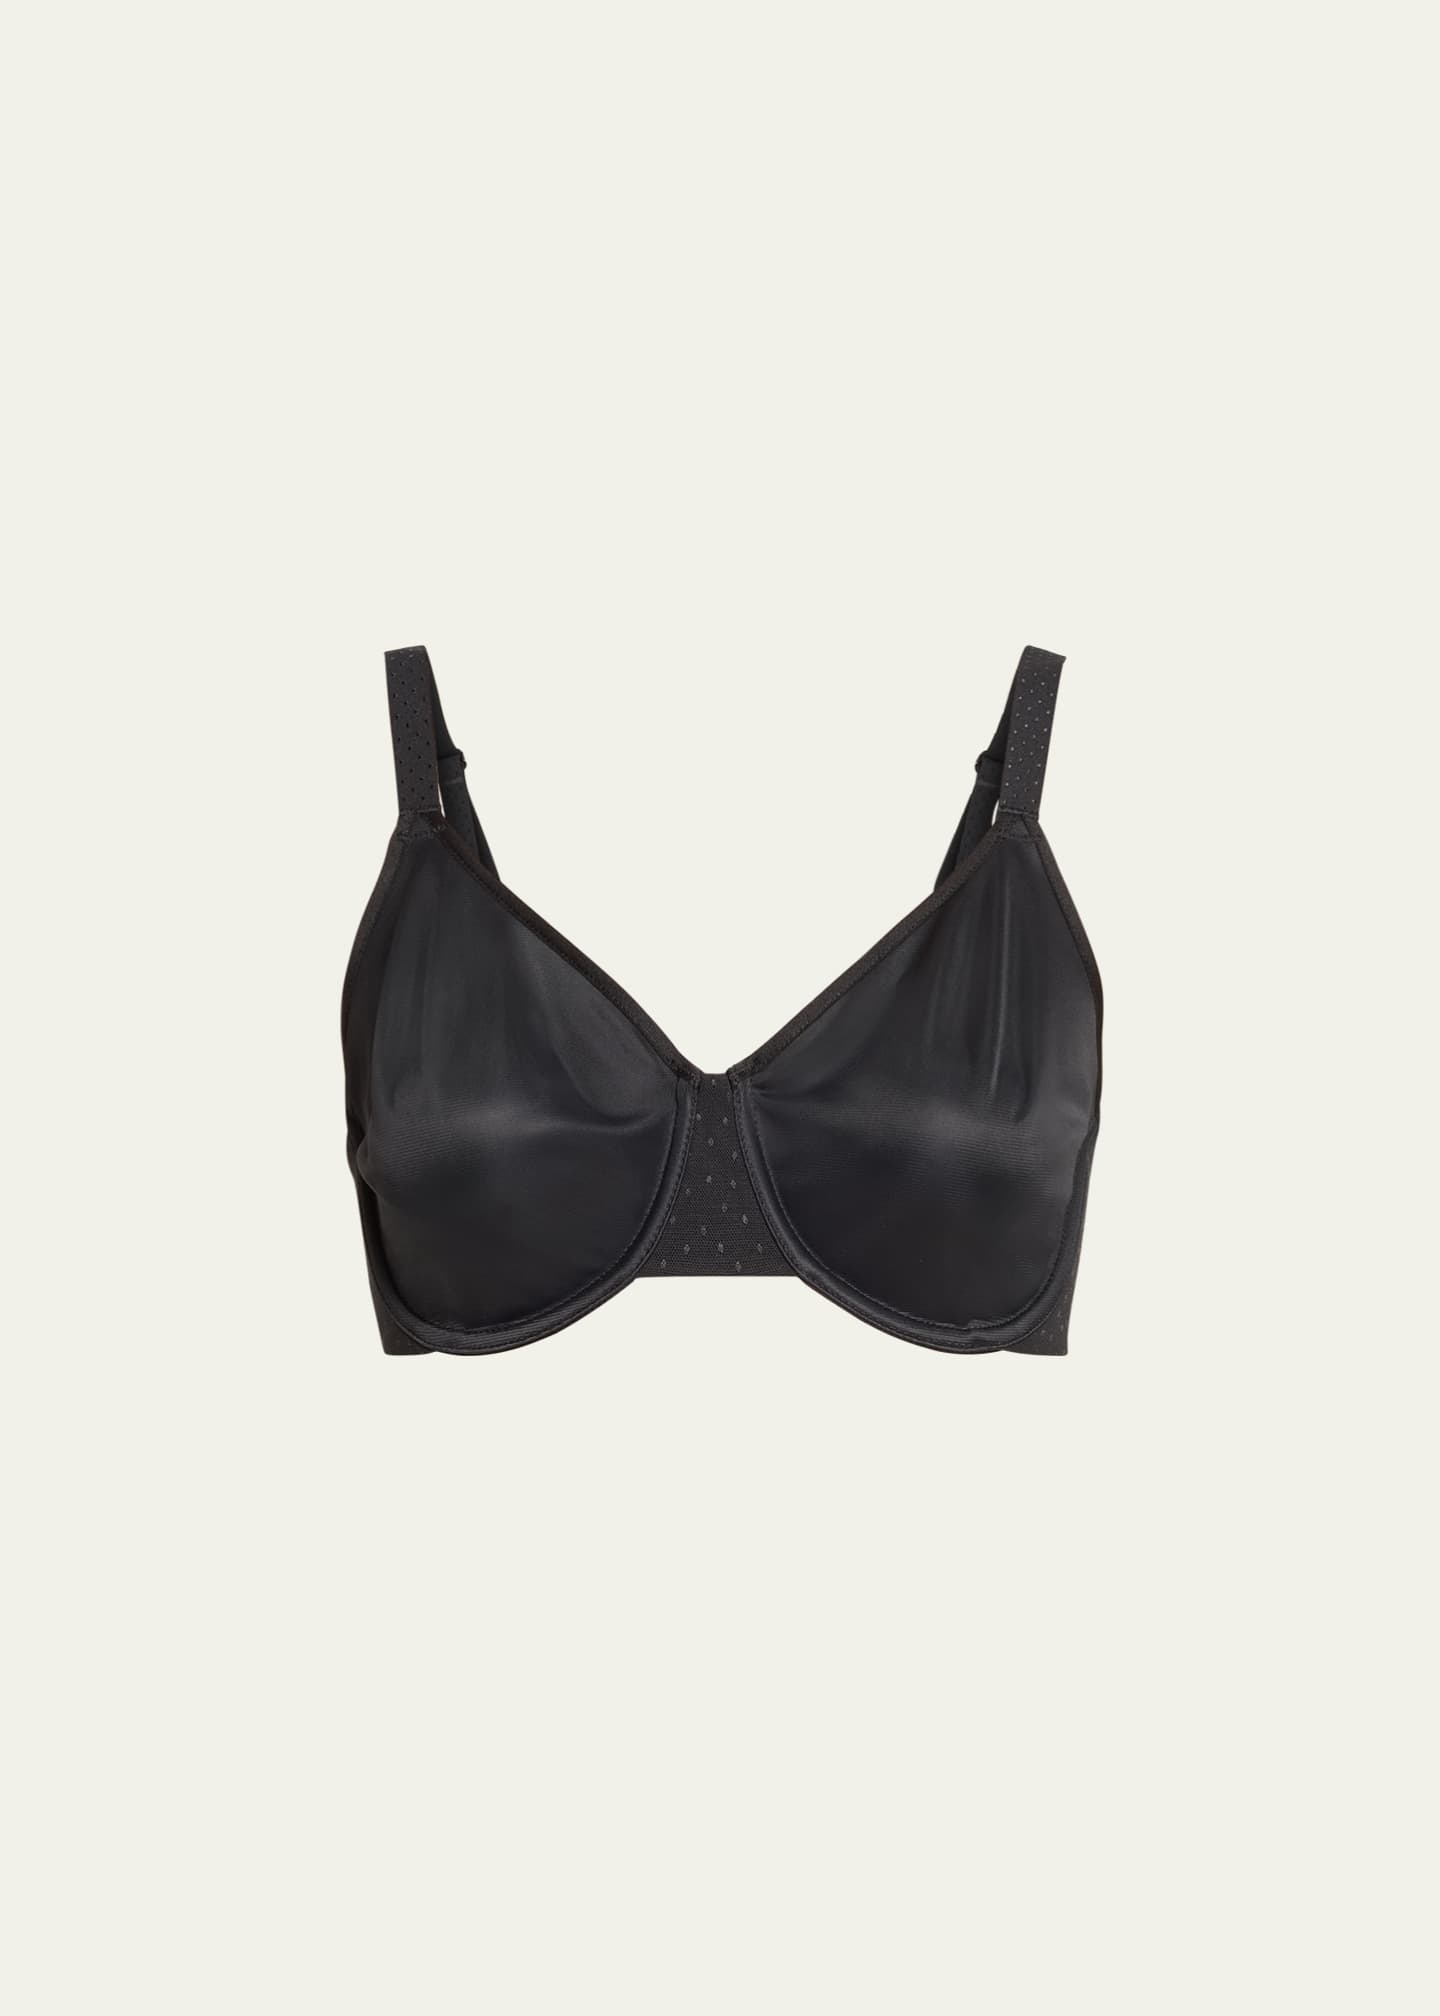 Wacoal Back Appeal Underwire Minimizer Bra Image 1 of 4